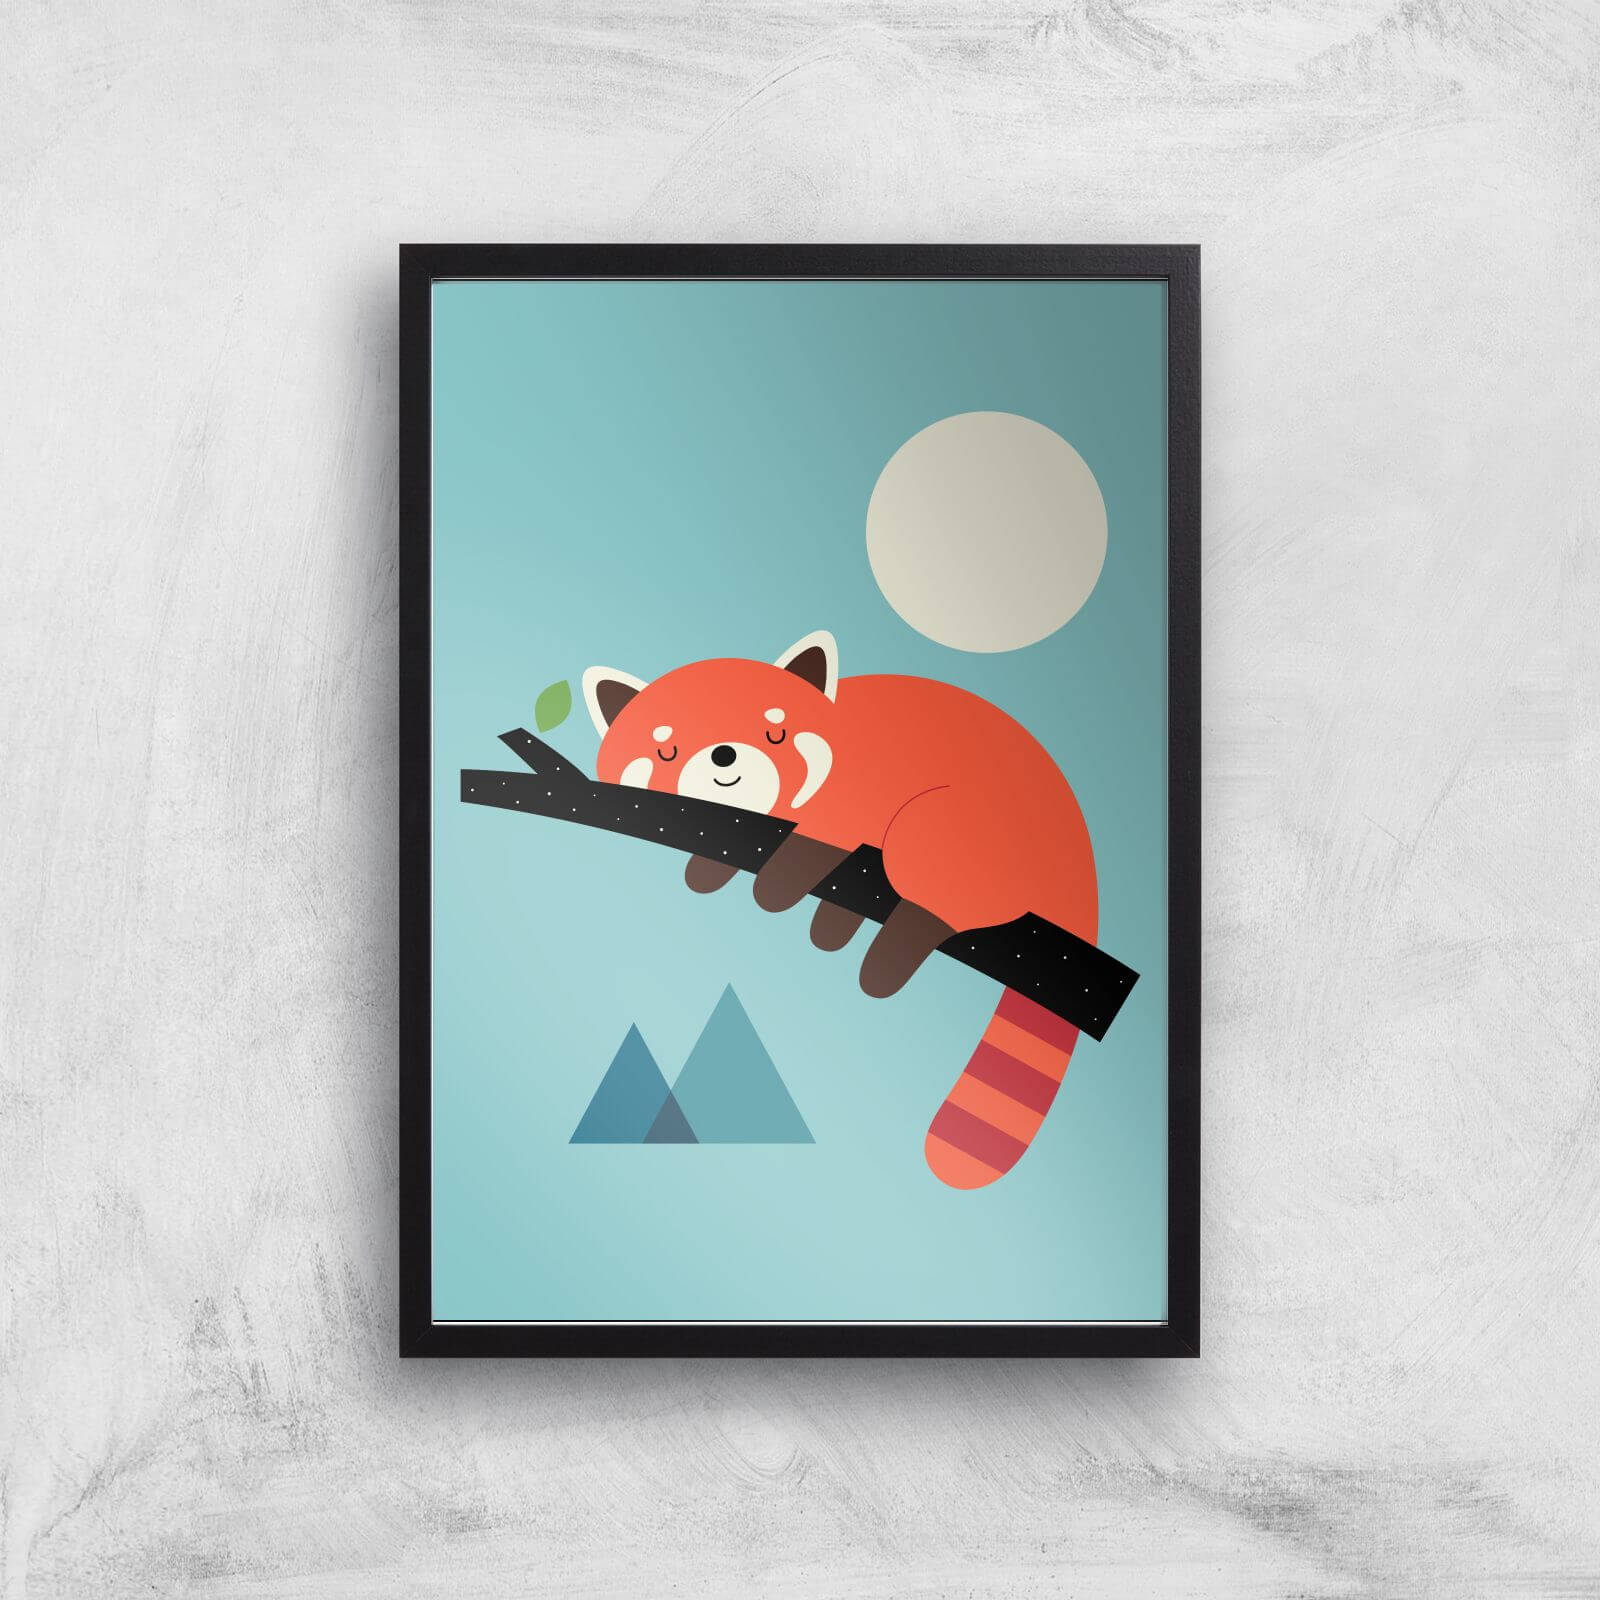 Andy Westface Nap Time Giclee Art Print - A3 - Black Frame